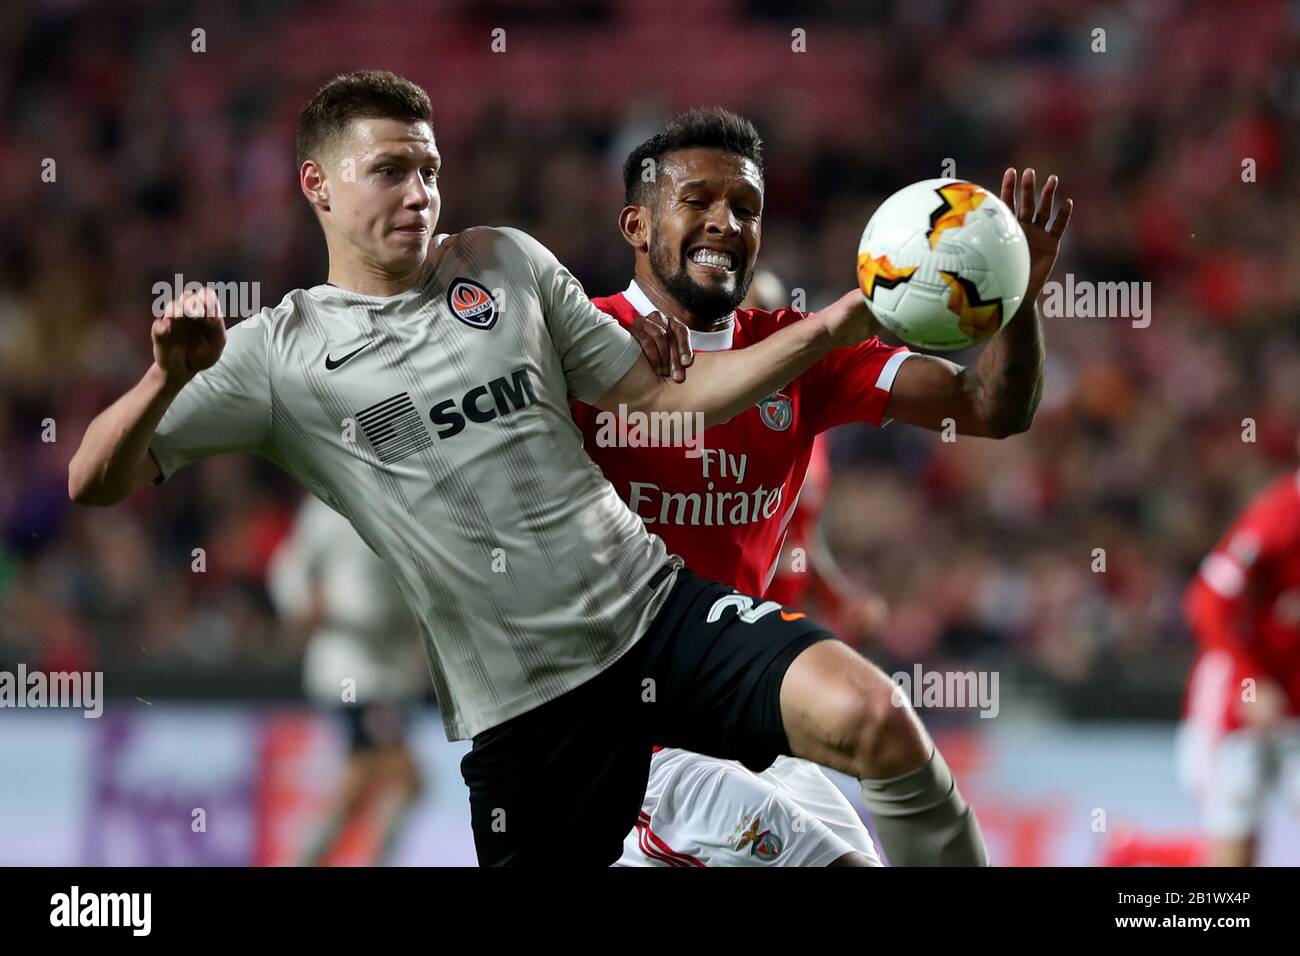 Lisbon, Portugal. 27th Feb, 2020. Mykola Matvienko of Shakhtar Donetsk (L) vies with Dyego Sousa of SL Benfica during the UEFA Europa League round of 32 second leg football match between SL Benfica and Shakhtar Donetsk at Luz stadium in Lisbon, Portugal, on February 27, 2020. Credit: Pedro Fiuza/ZUMA Wire/Alamy Live News Stock Photo